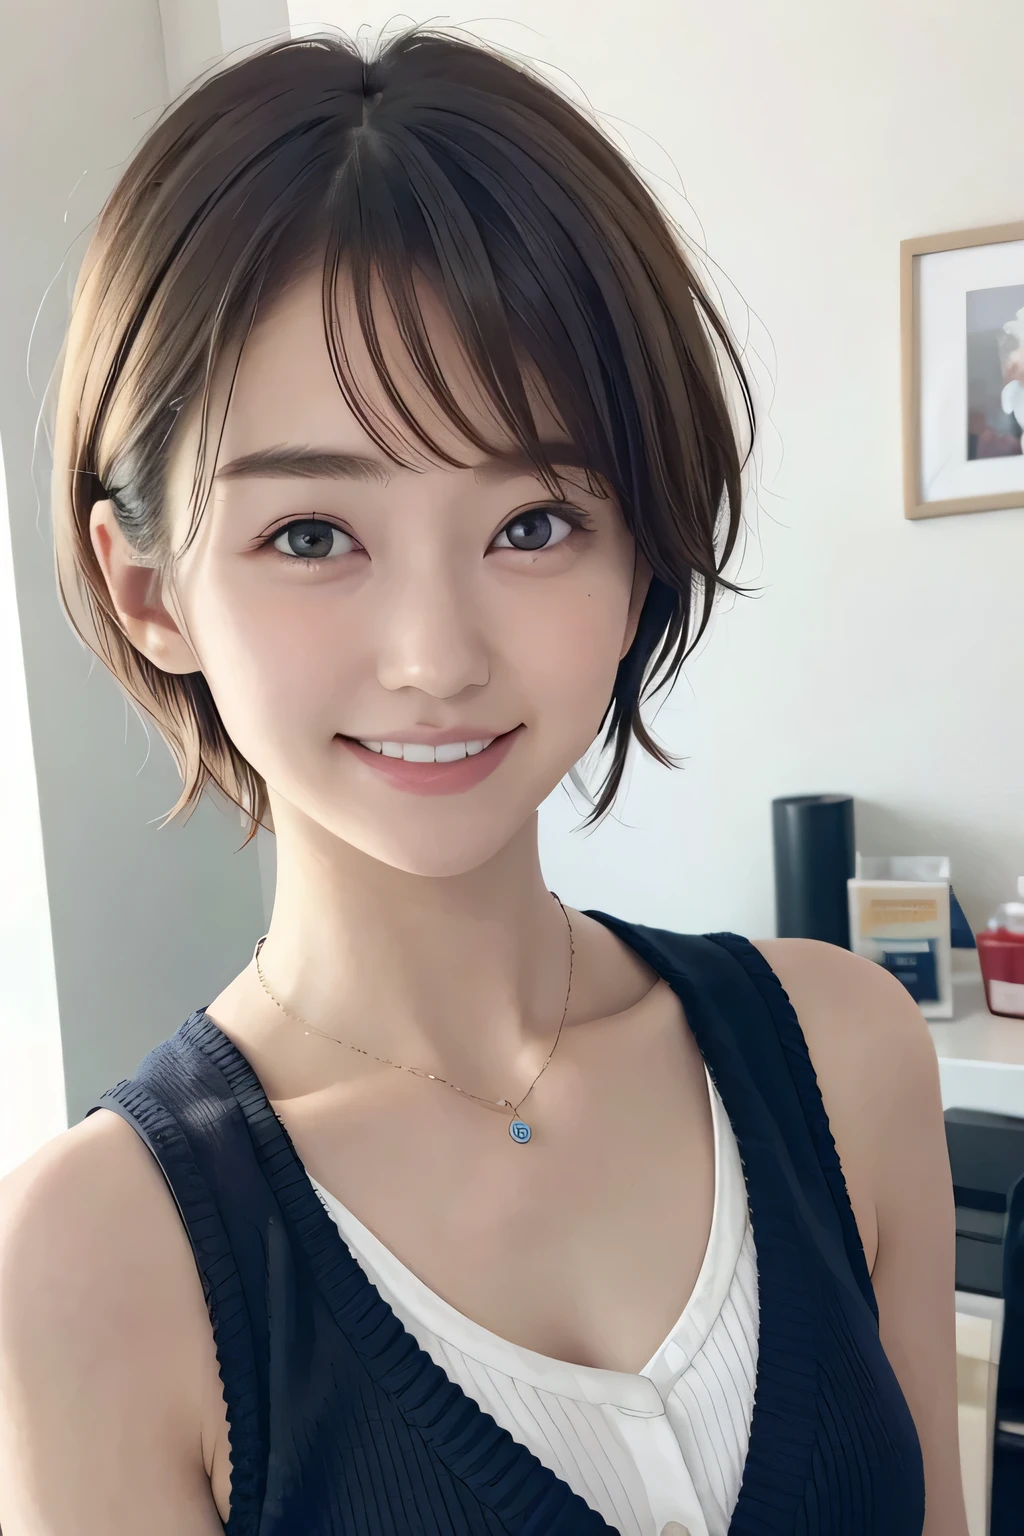 205 ((short hair)), 20-year-old female, In underwear、Put a cardigan over your shoulders、 A refreshing smile、Beautiful teeth alignment、Dark eyeliner、Dark brown hair、ear piercing、Necklace around the neck、Looking at the cameraカーディガンを袖を通さずに着る